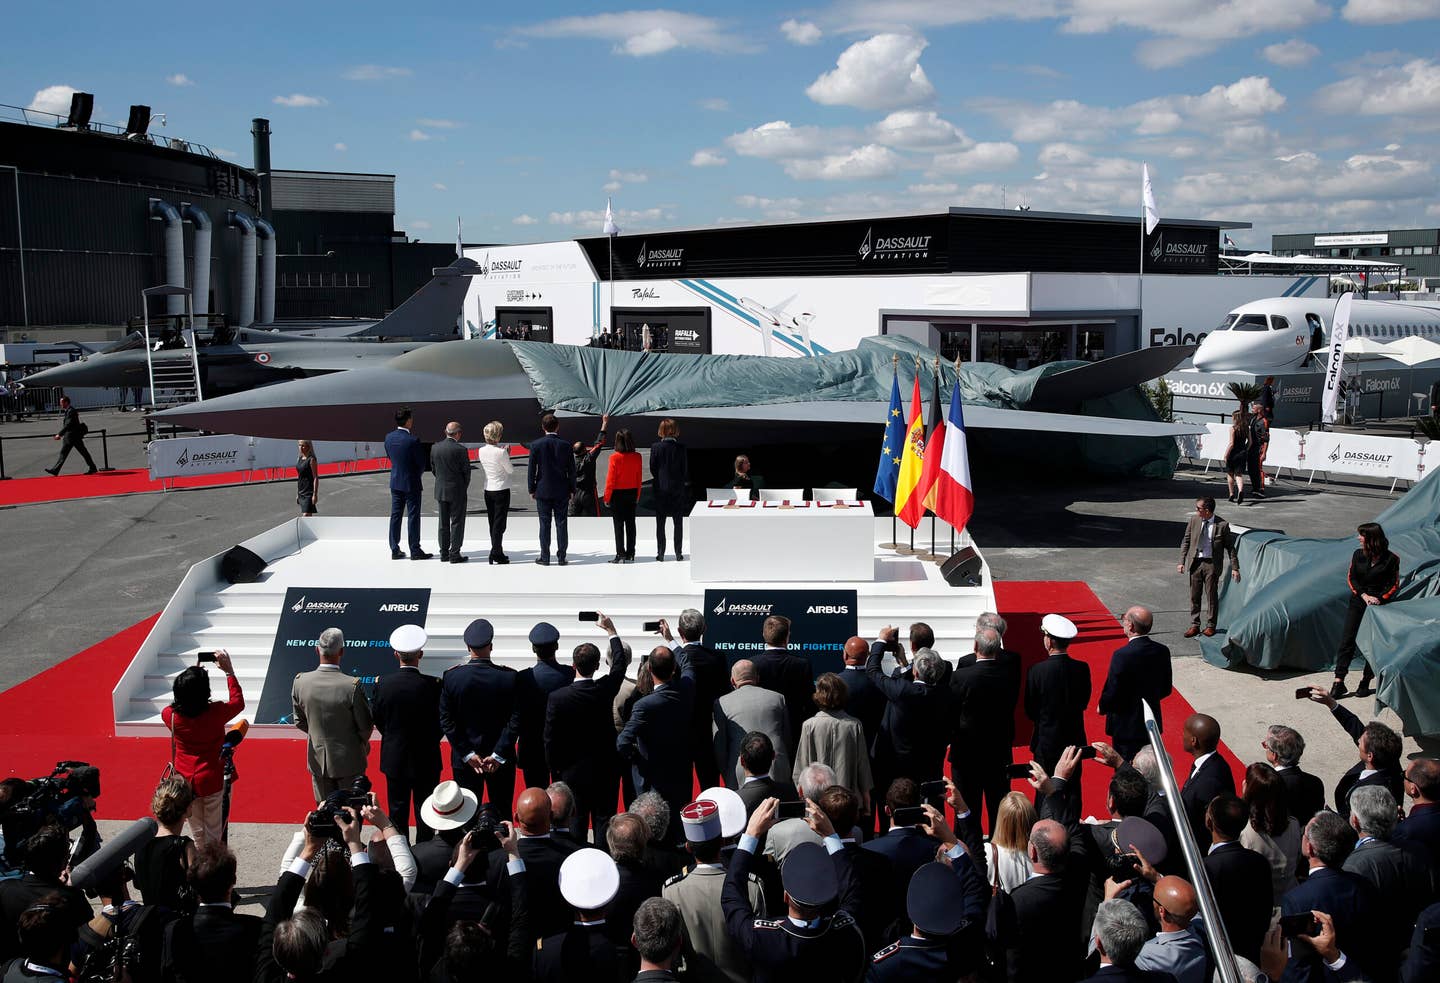 French President Emmanuel Macron; Eric Trappier, Chairman and CEO of Dassault Aviation; Spanish Defence Minister Margarita Robles; French Defence Minister Florence Parly and German Defense Minister Ursula von der Leyen attend the unveiling of a full-scale model of the manned fighter component of the pan-European FCAS, during the Paris Air Show in 2019. <em>YOAN VALAT/AFP via Getty Images</em>